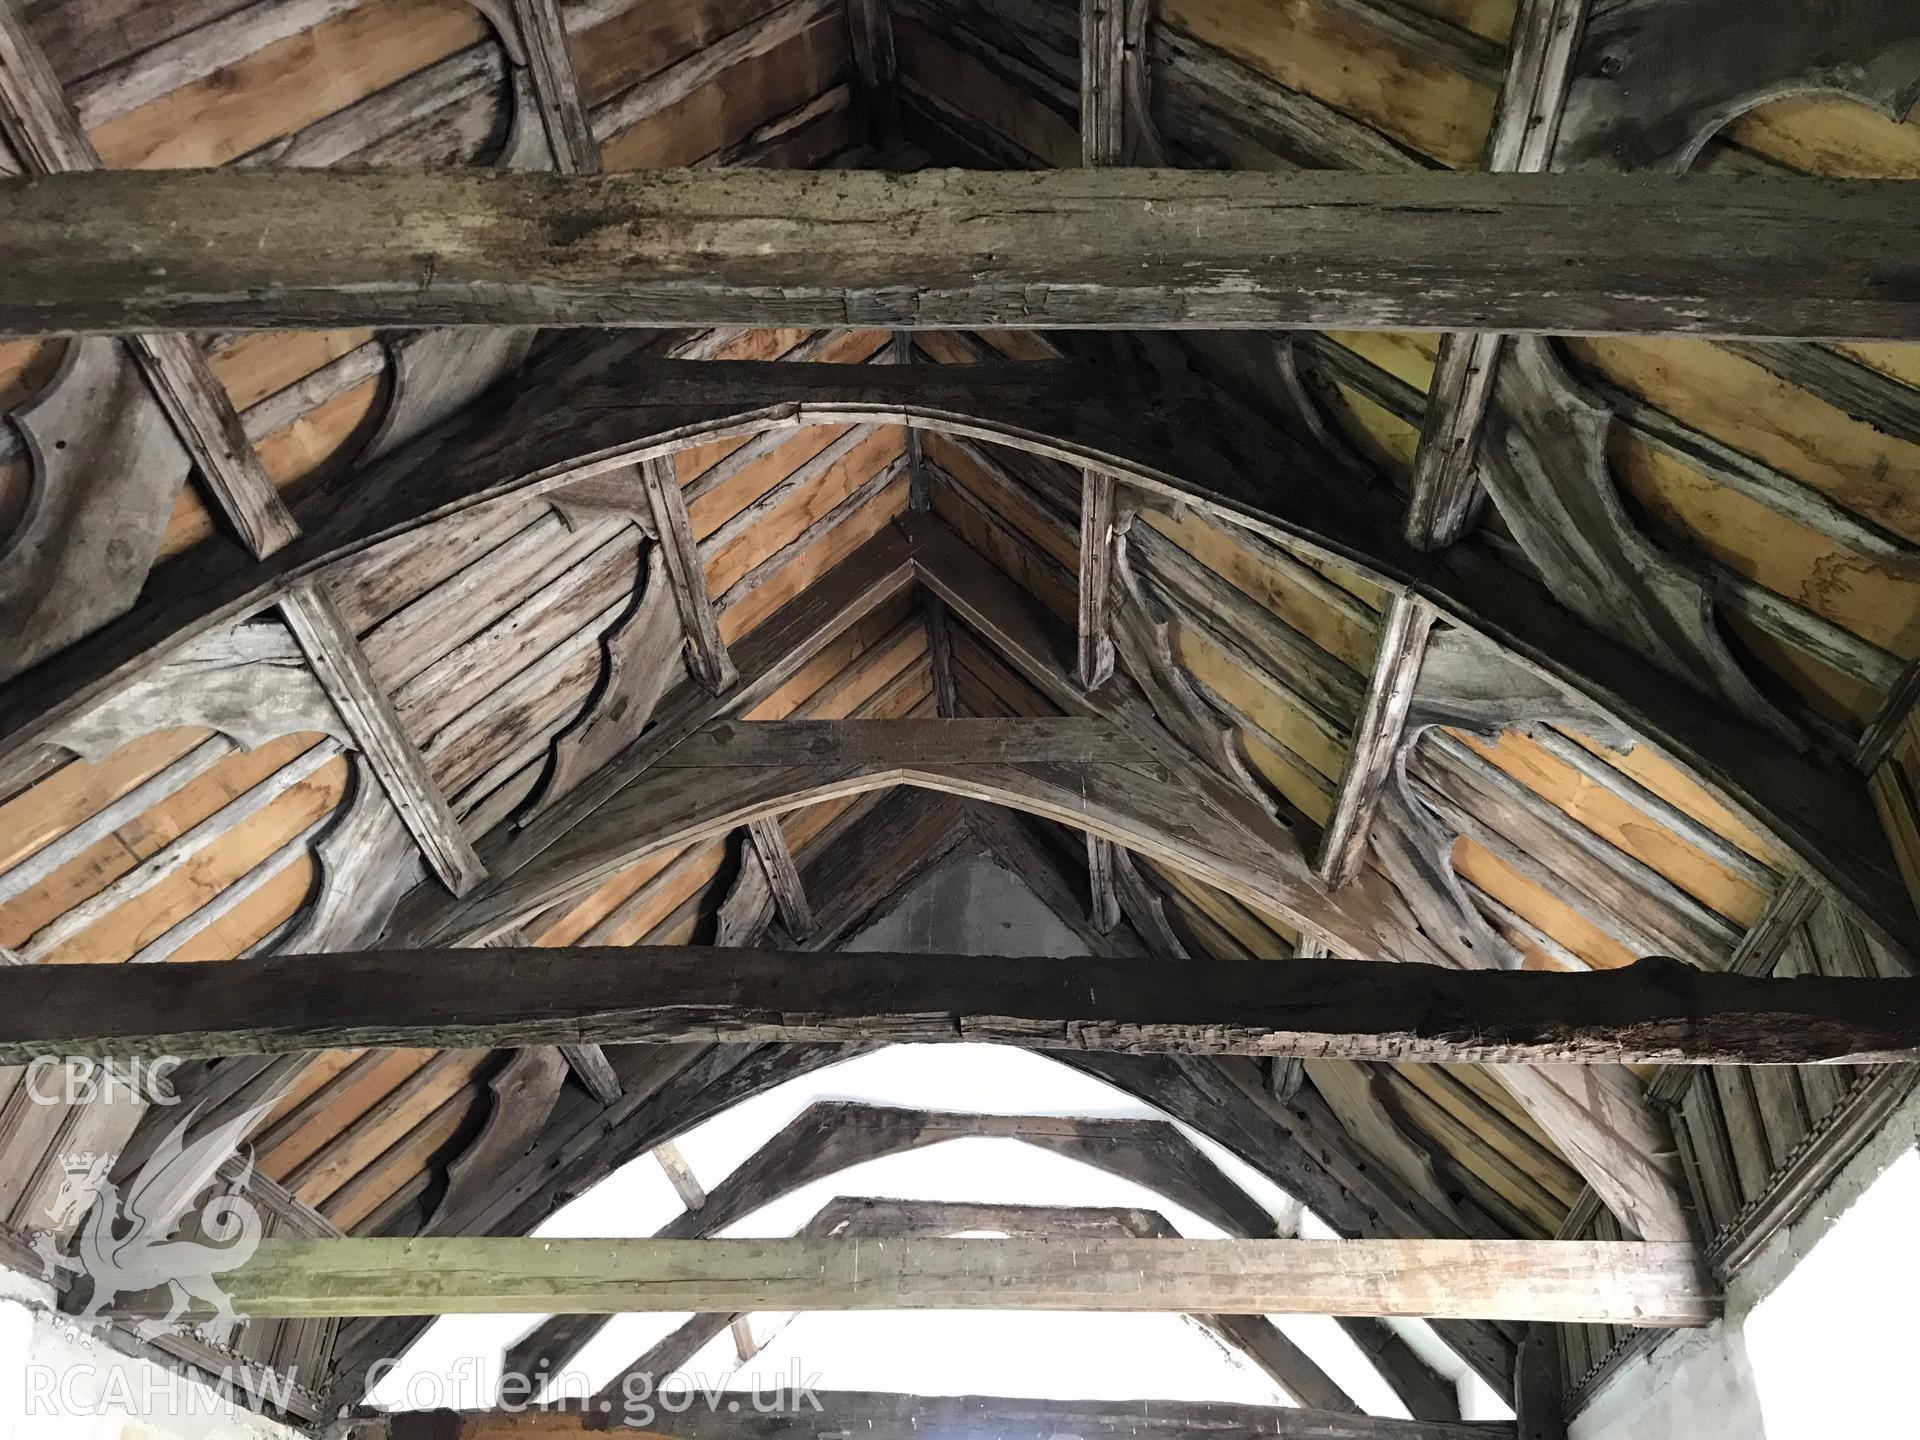 Colour photo showing interior view of the roof at St. Cewydd's Church, Diserth, taken by Paul R. Davis, 19th May 2018.